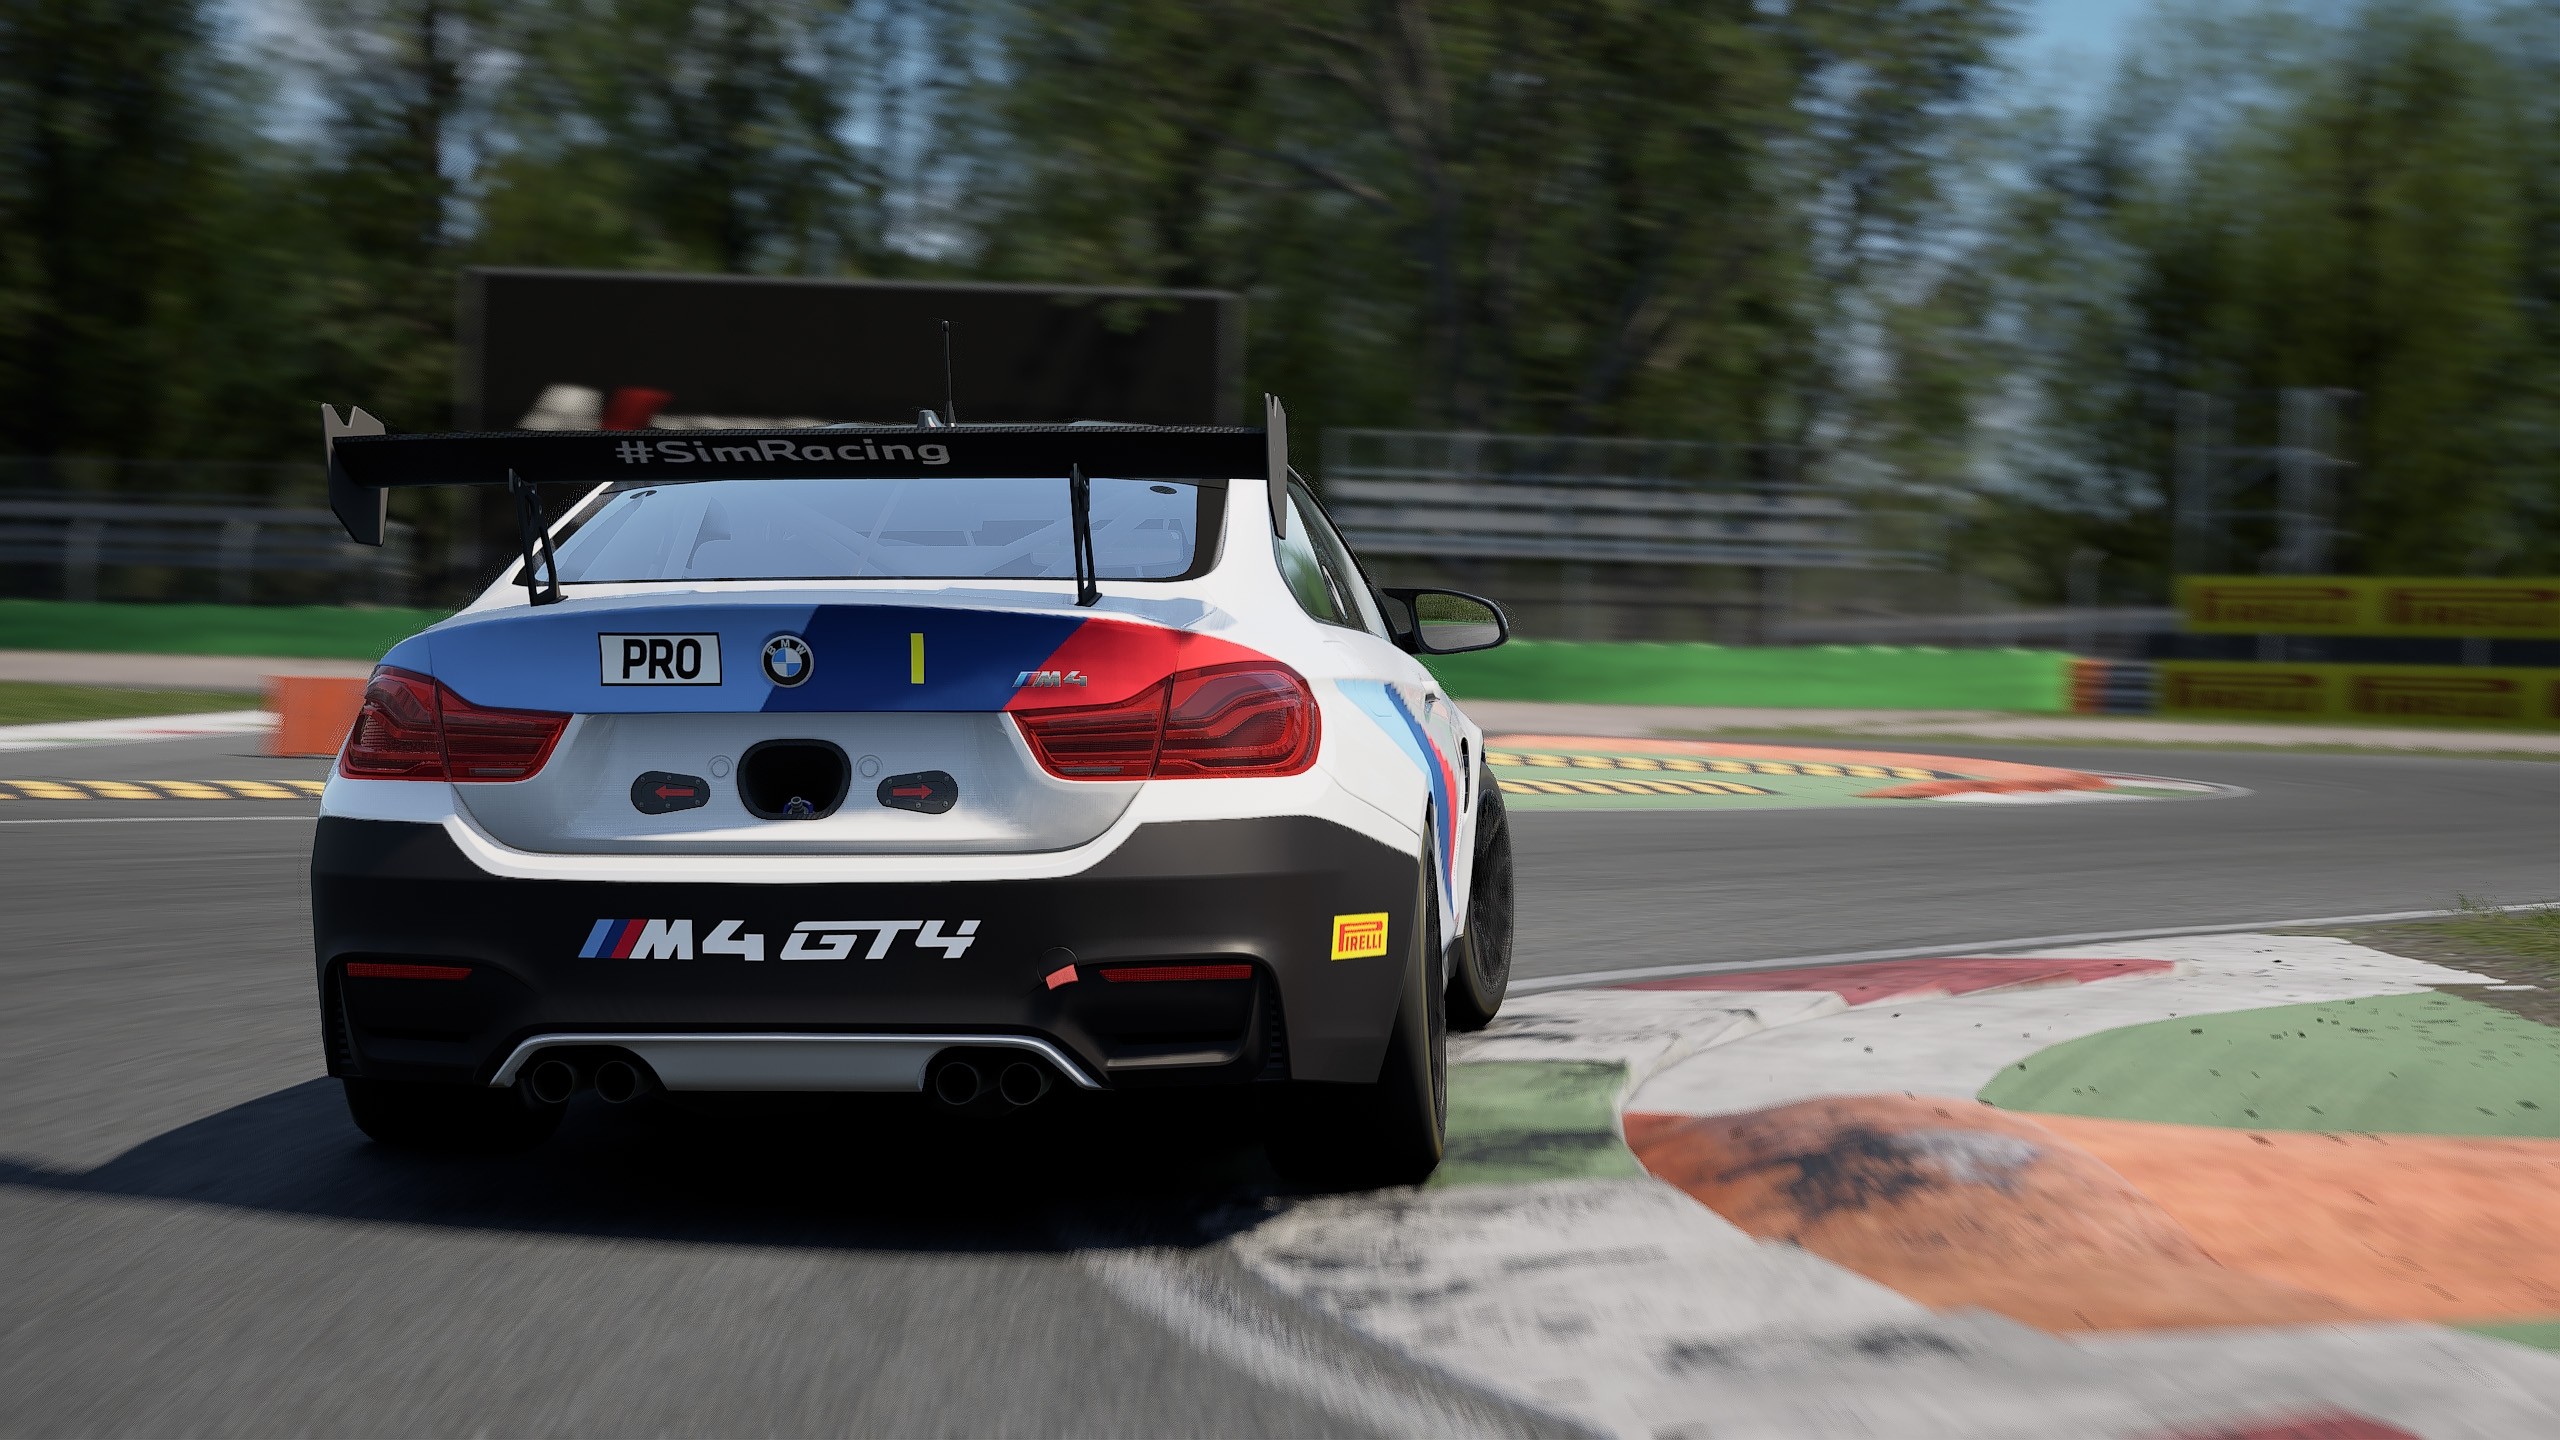 BMW SIM Cups 2021 offer larger range of formats, BMW race cars and